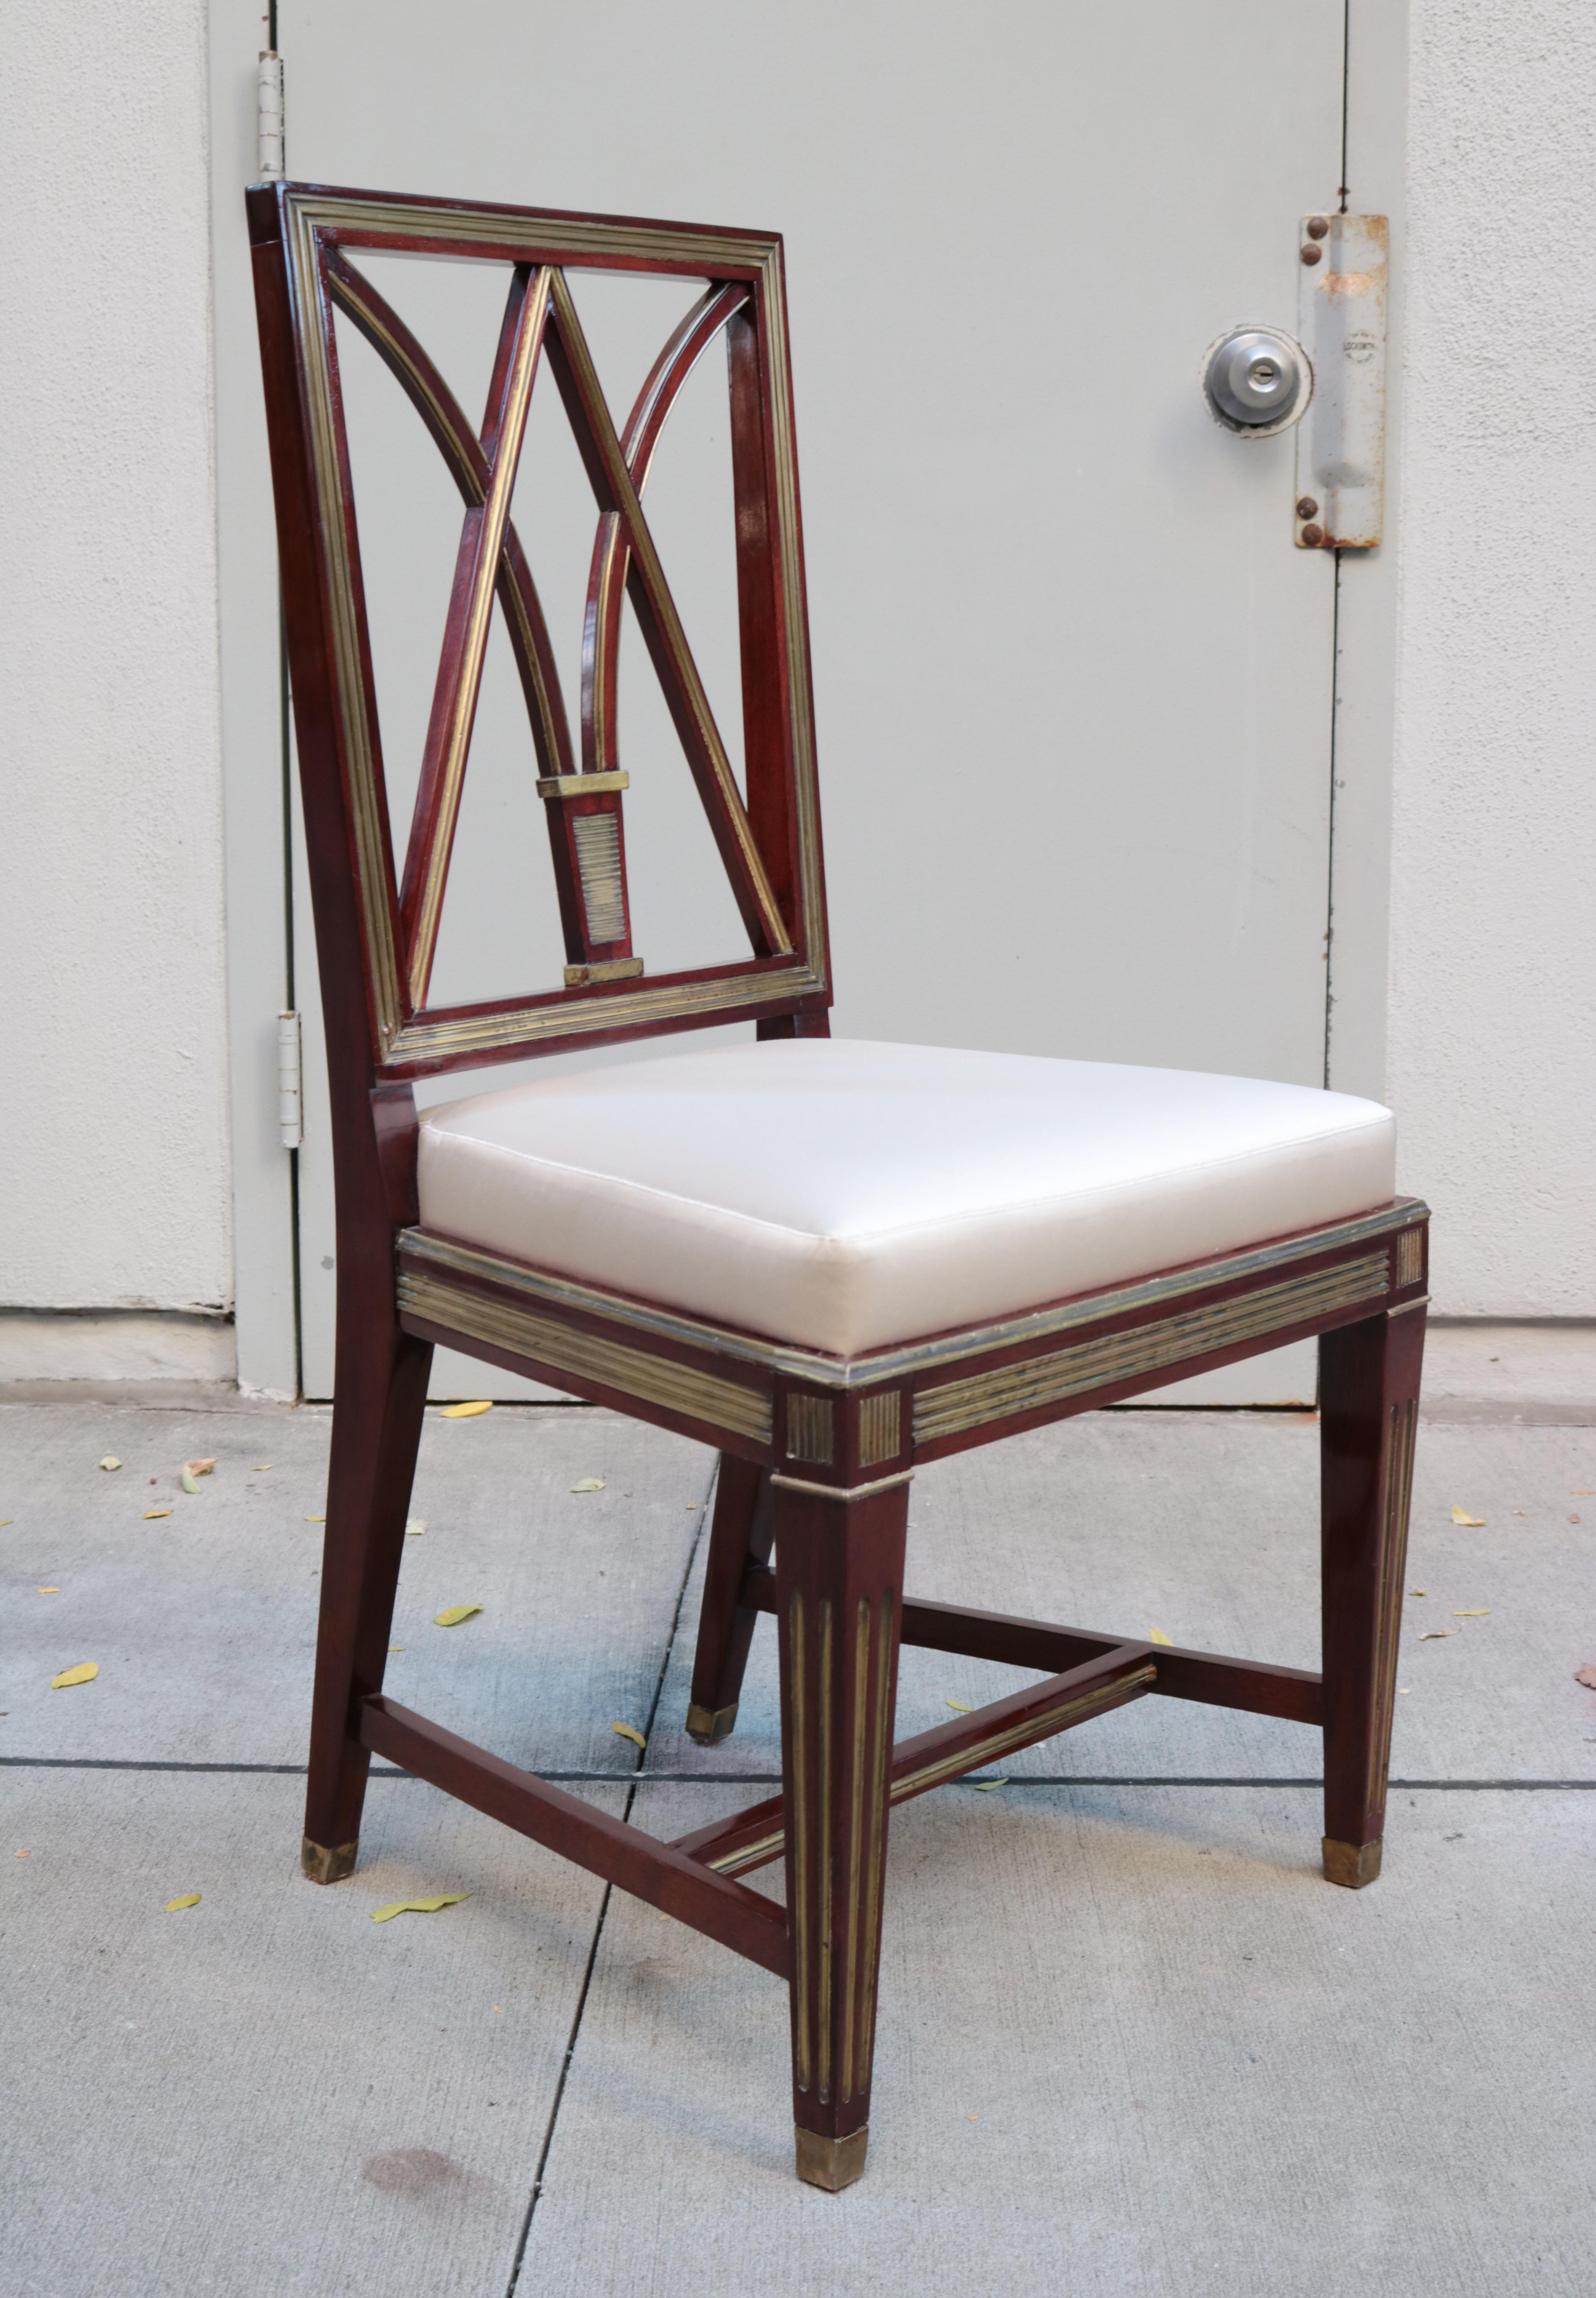 A set of four neoclassical side chairs.
Mahogany with patinated brass inlay, details and sabots.